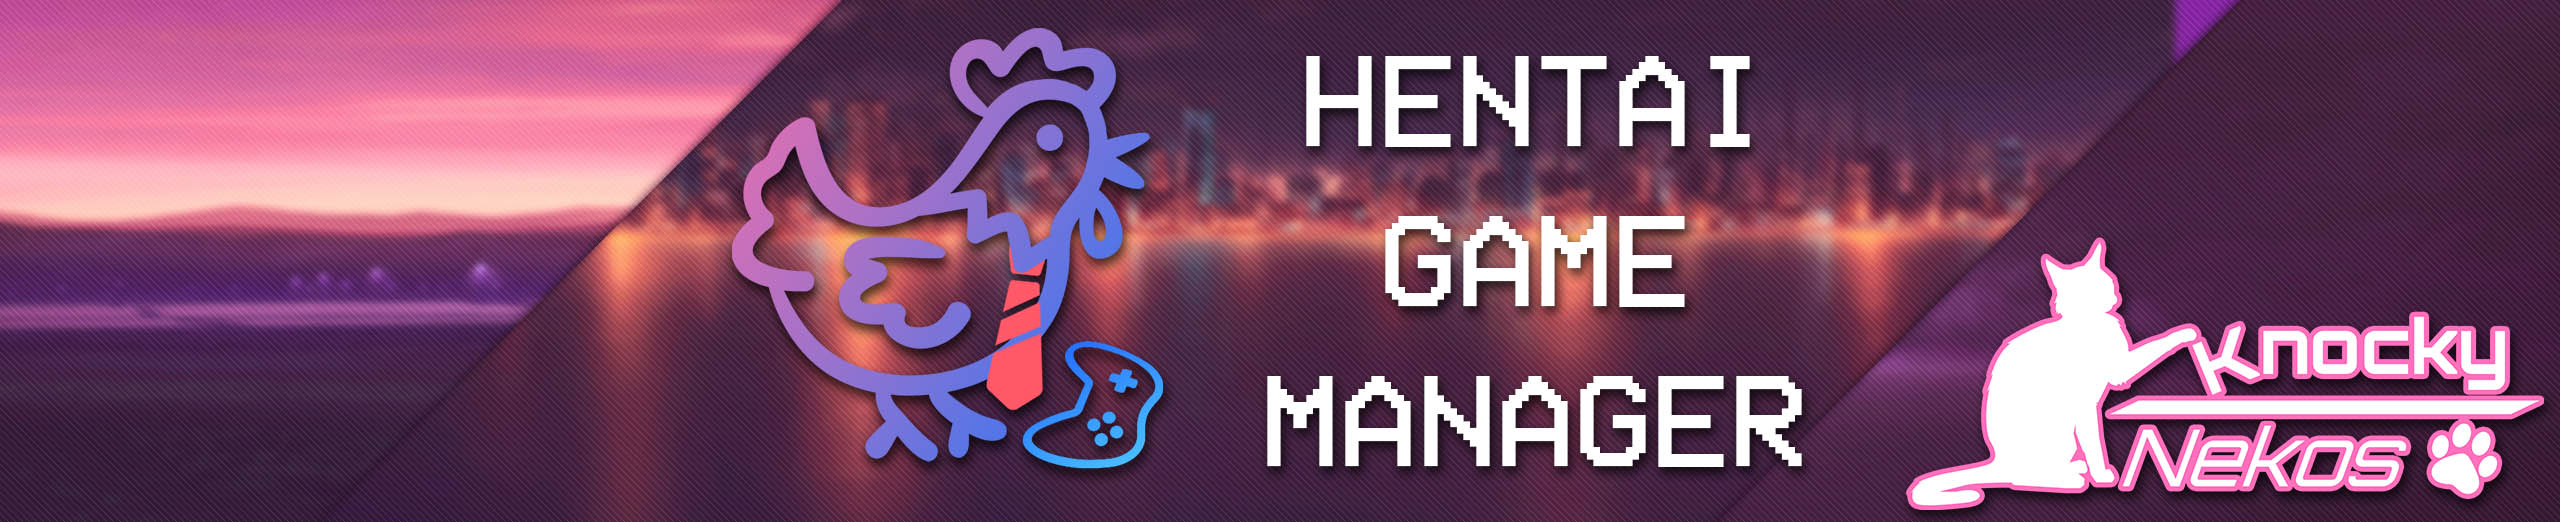 Hentai Game Manager